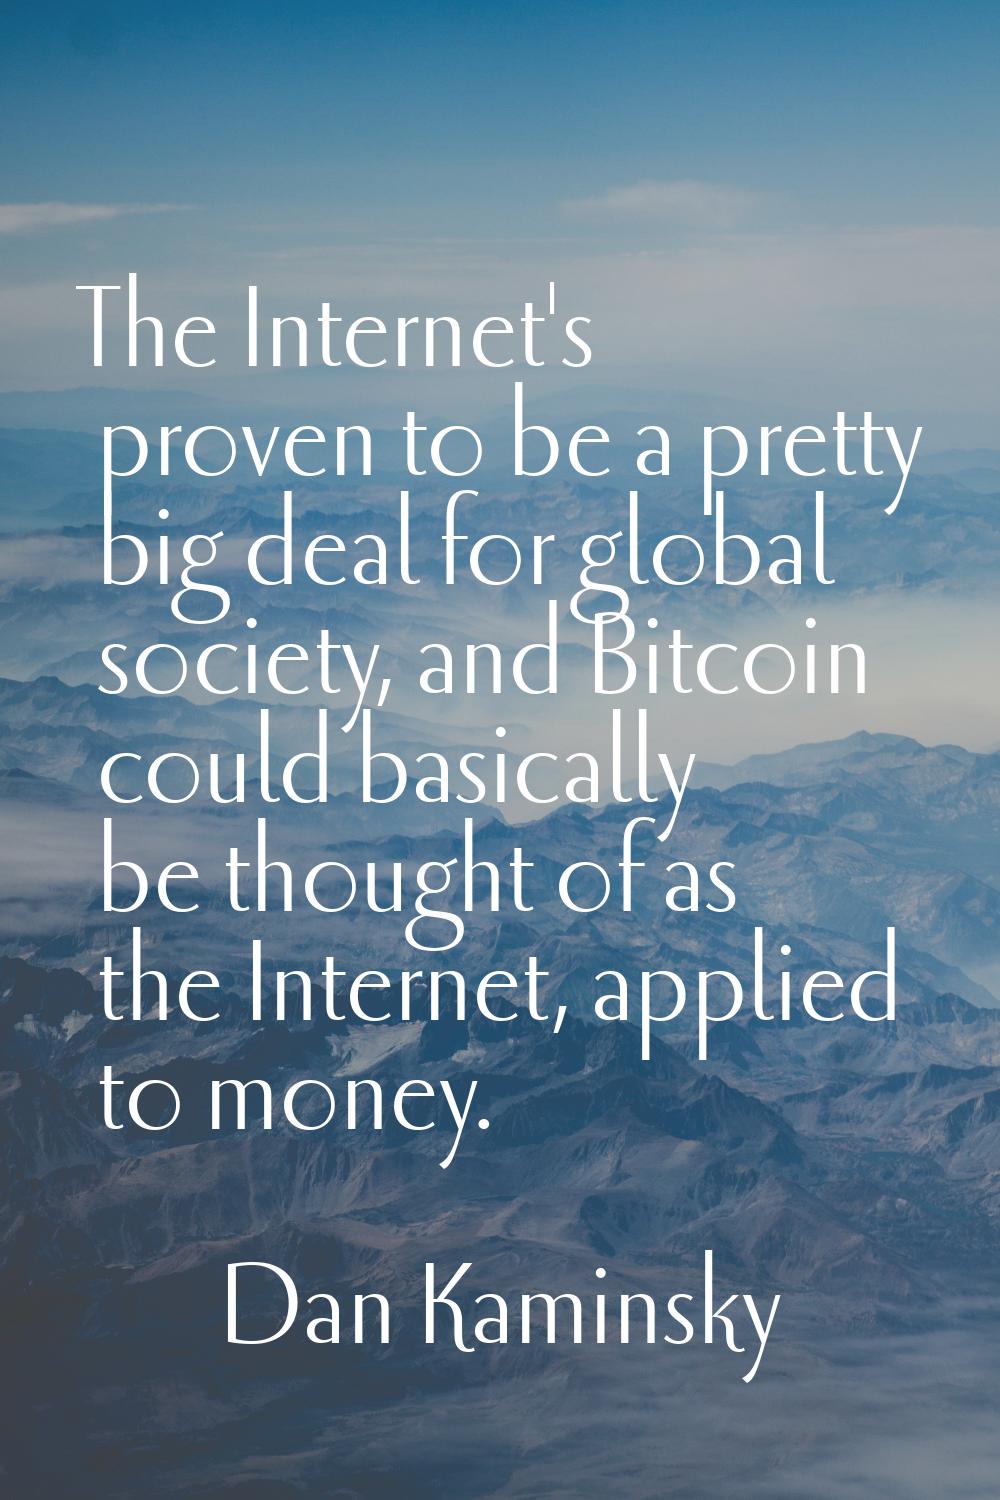 The Internet's proven to be a pretty big deal for global society, and Bitcoin could basically be th